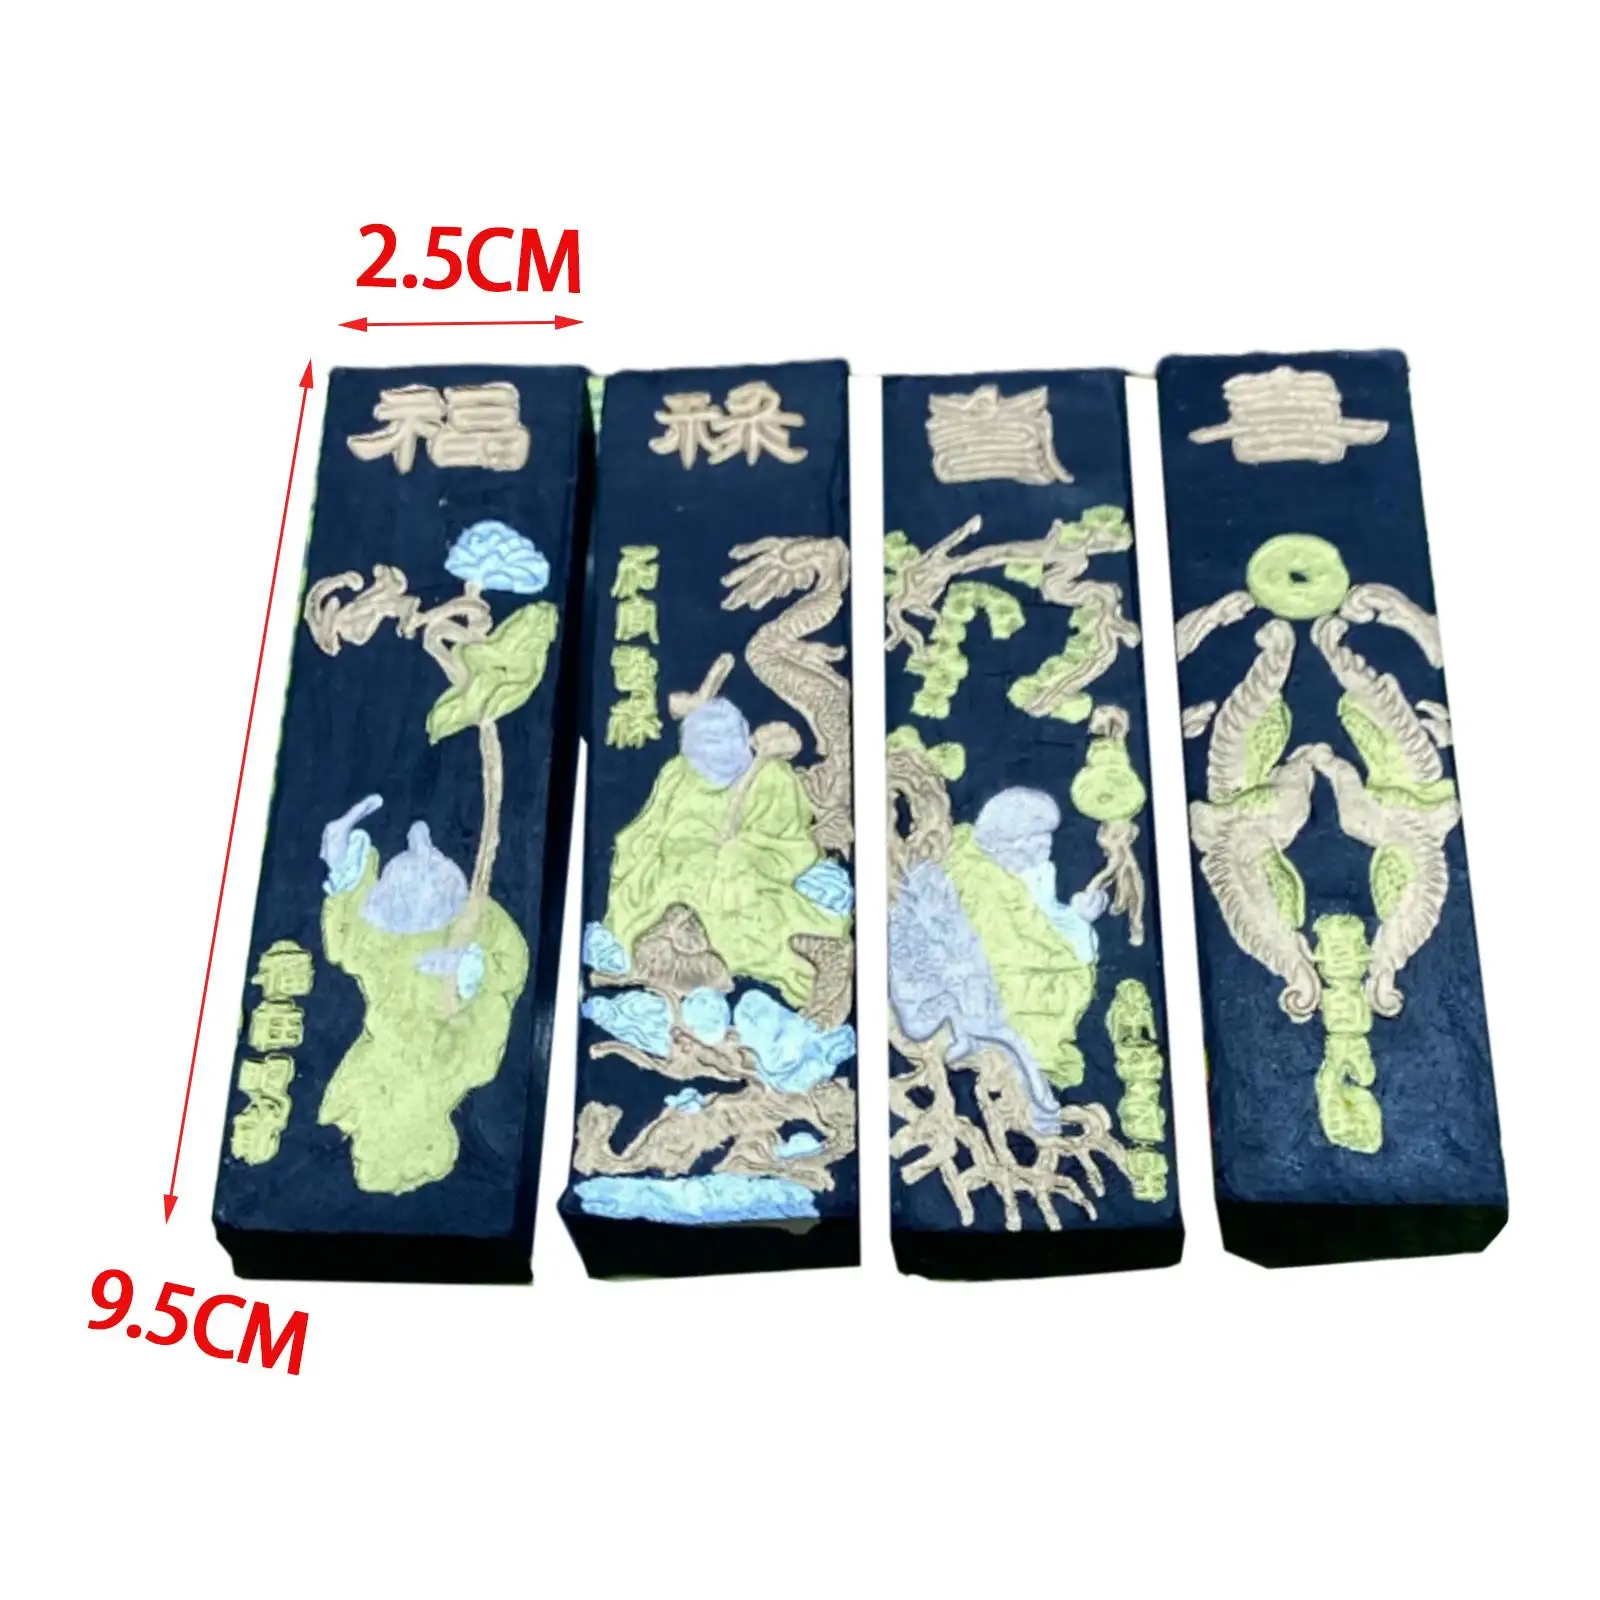 4 Pieces Chinese Calligraphy Ink Blocks Chinese Japanese Calligraphy Calligraphy Writing Ink for Gifts Coloring Painting Writing